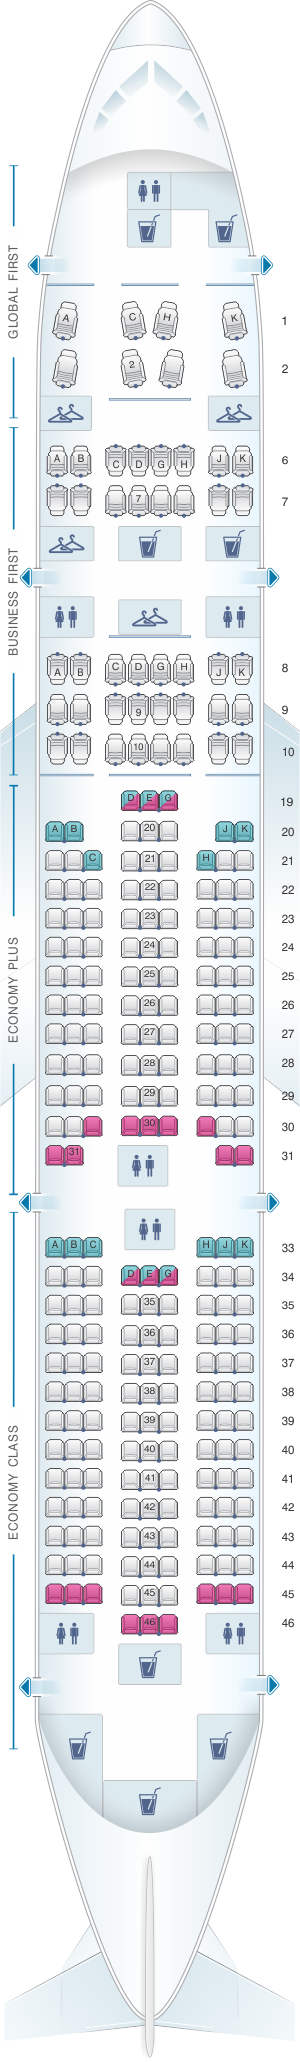 Seat Map United Airlines Boeing B777 200 (777) - version 2 ...